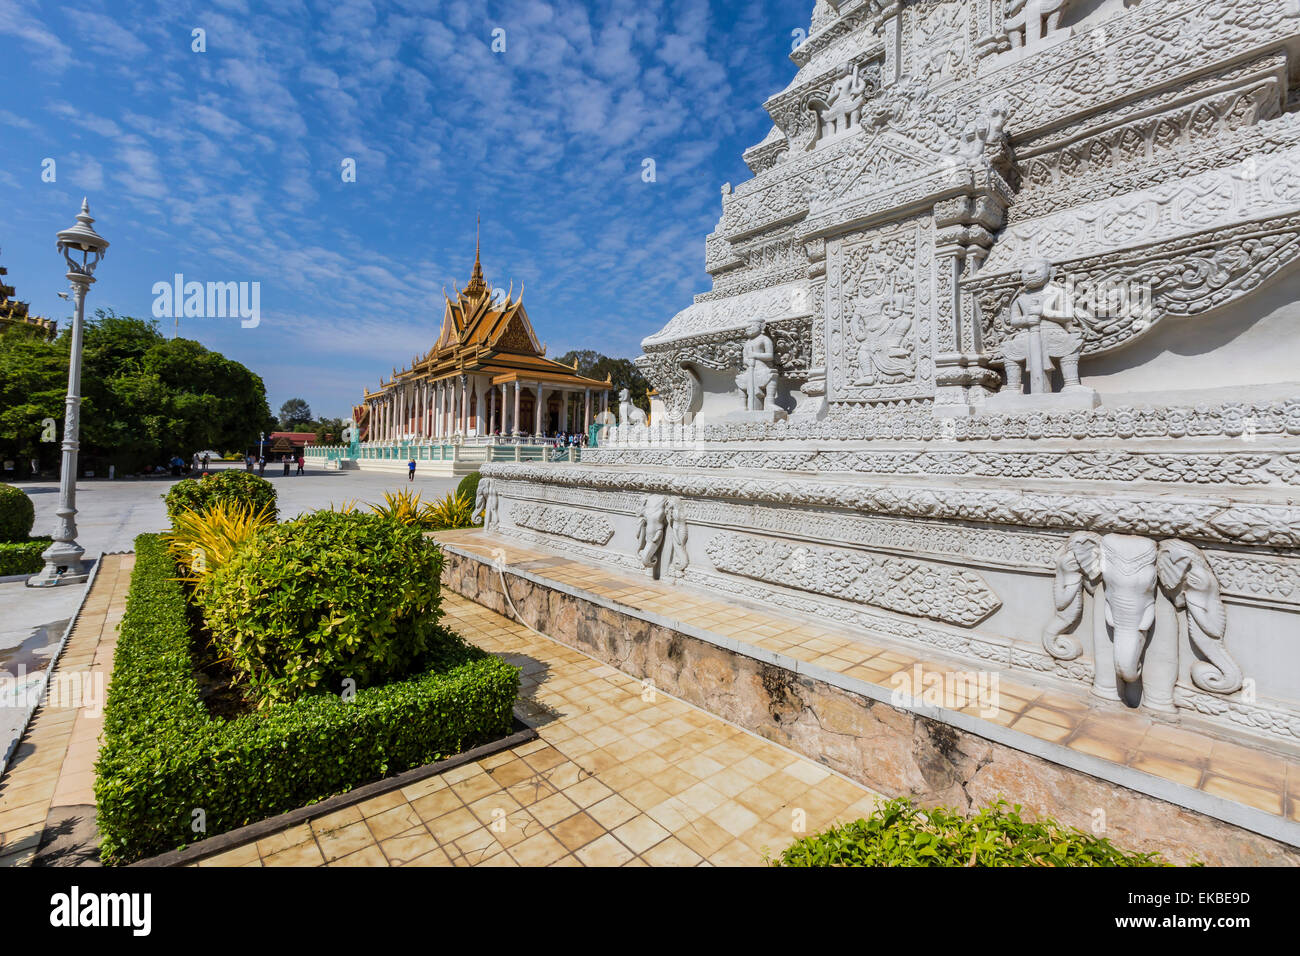 Stupa in the Royal Palace, in the capital city of Phnom Penh, Cambodia, Indochina, Southeast Asia, Asia Stock Photo